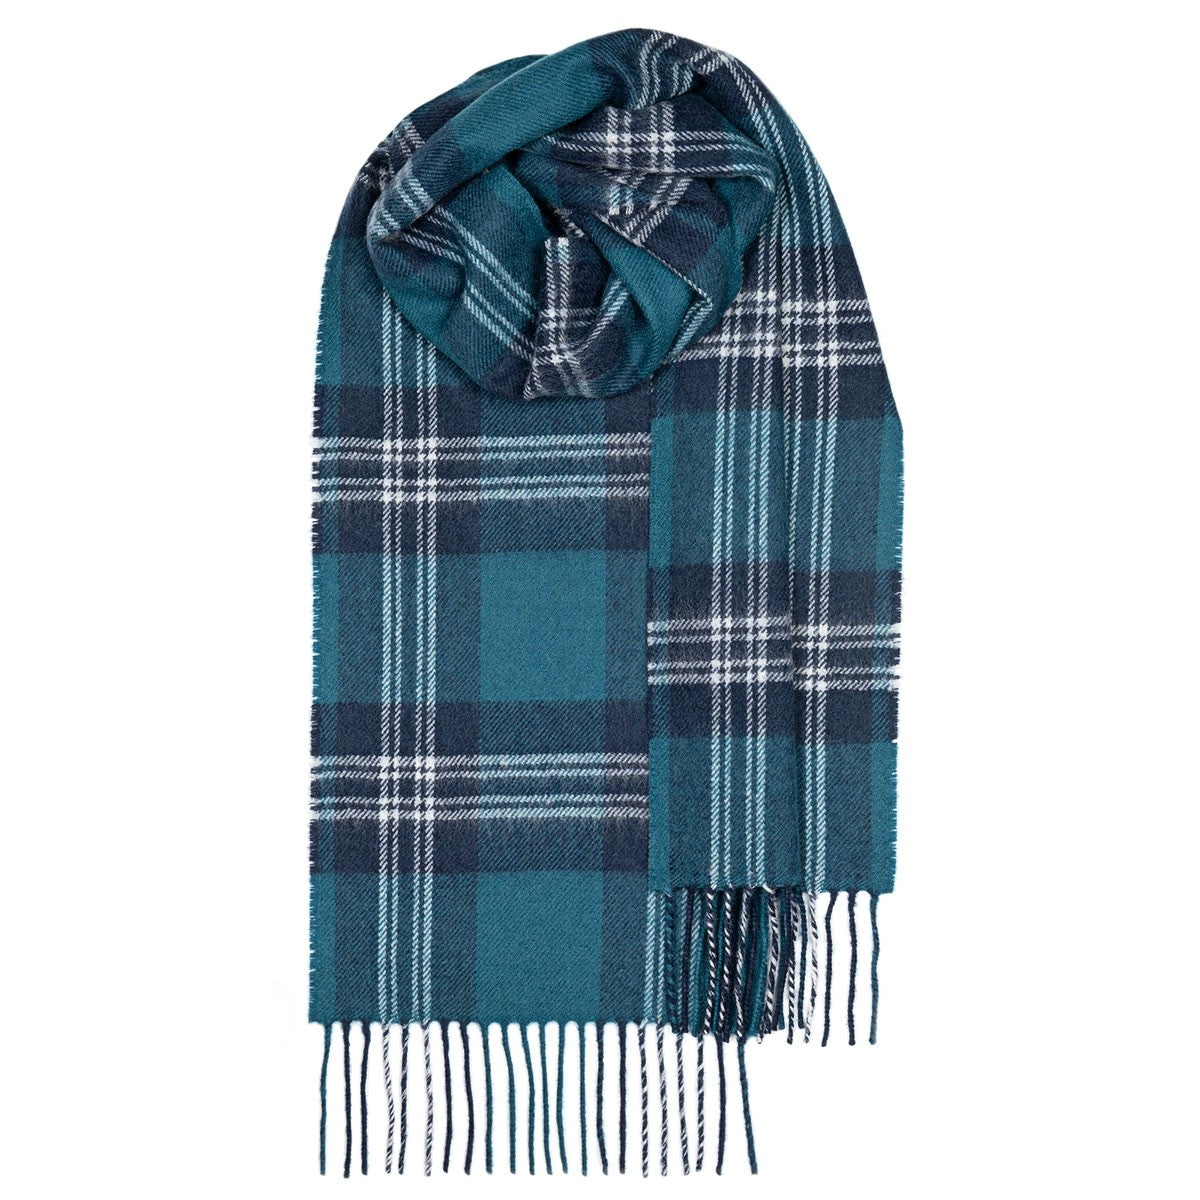 Plaid Scarves, Tartan Scarves, cashmere and lambswool